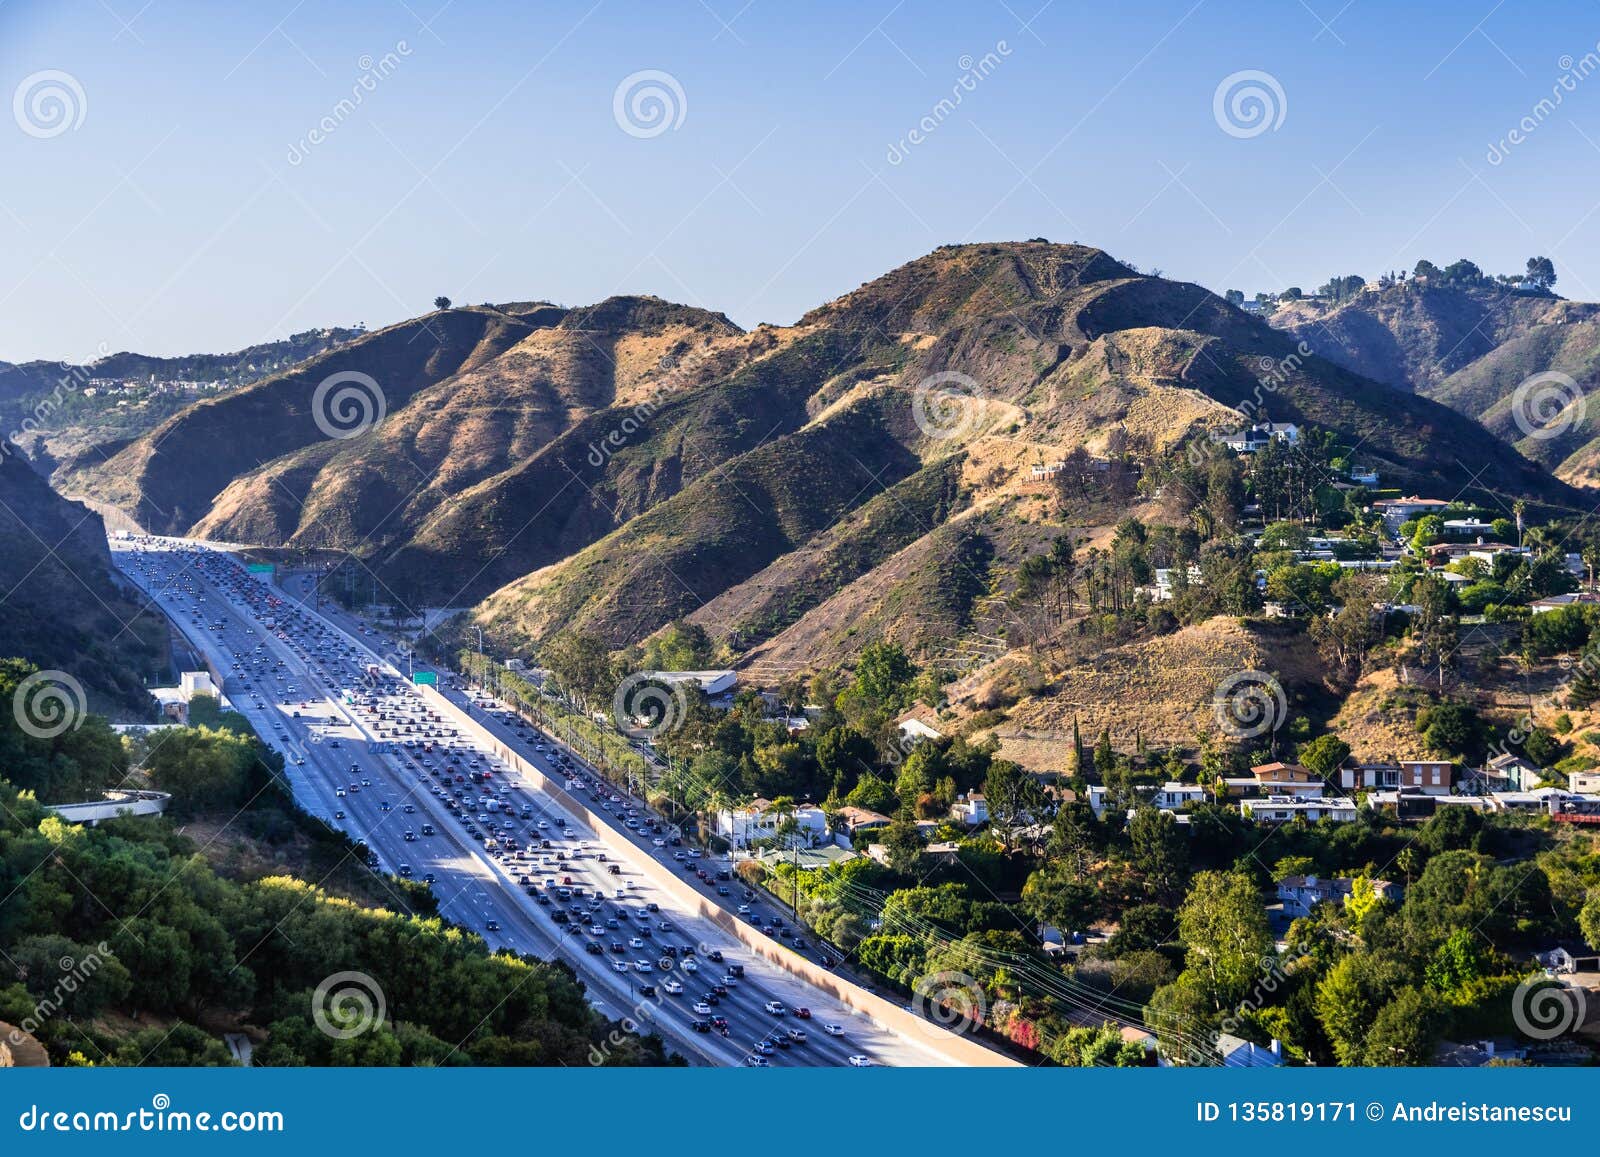 aerial view of highway 405 with heavy traffic; the hills of bel air neighborhood in the background; los angeles, california